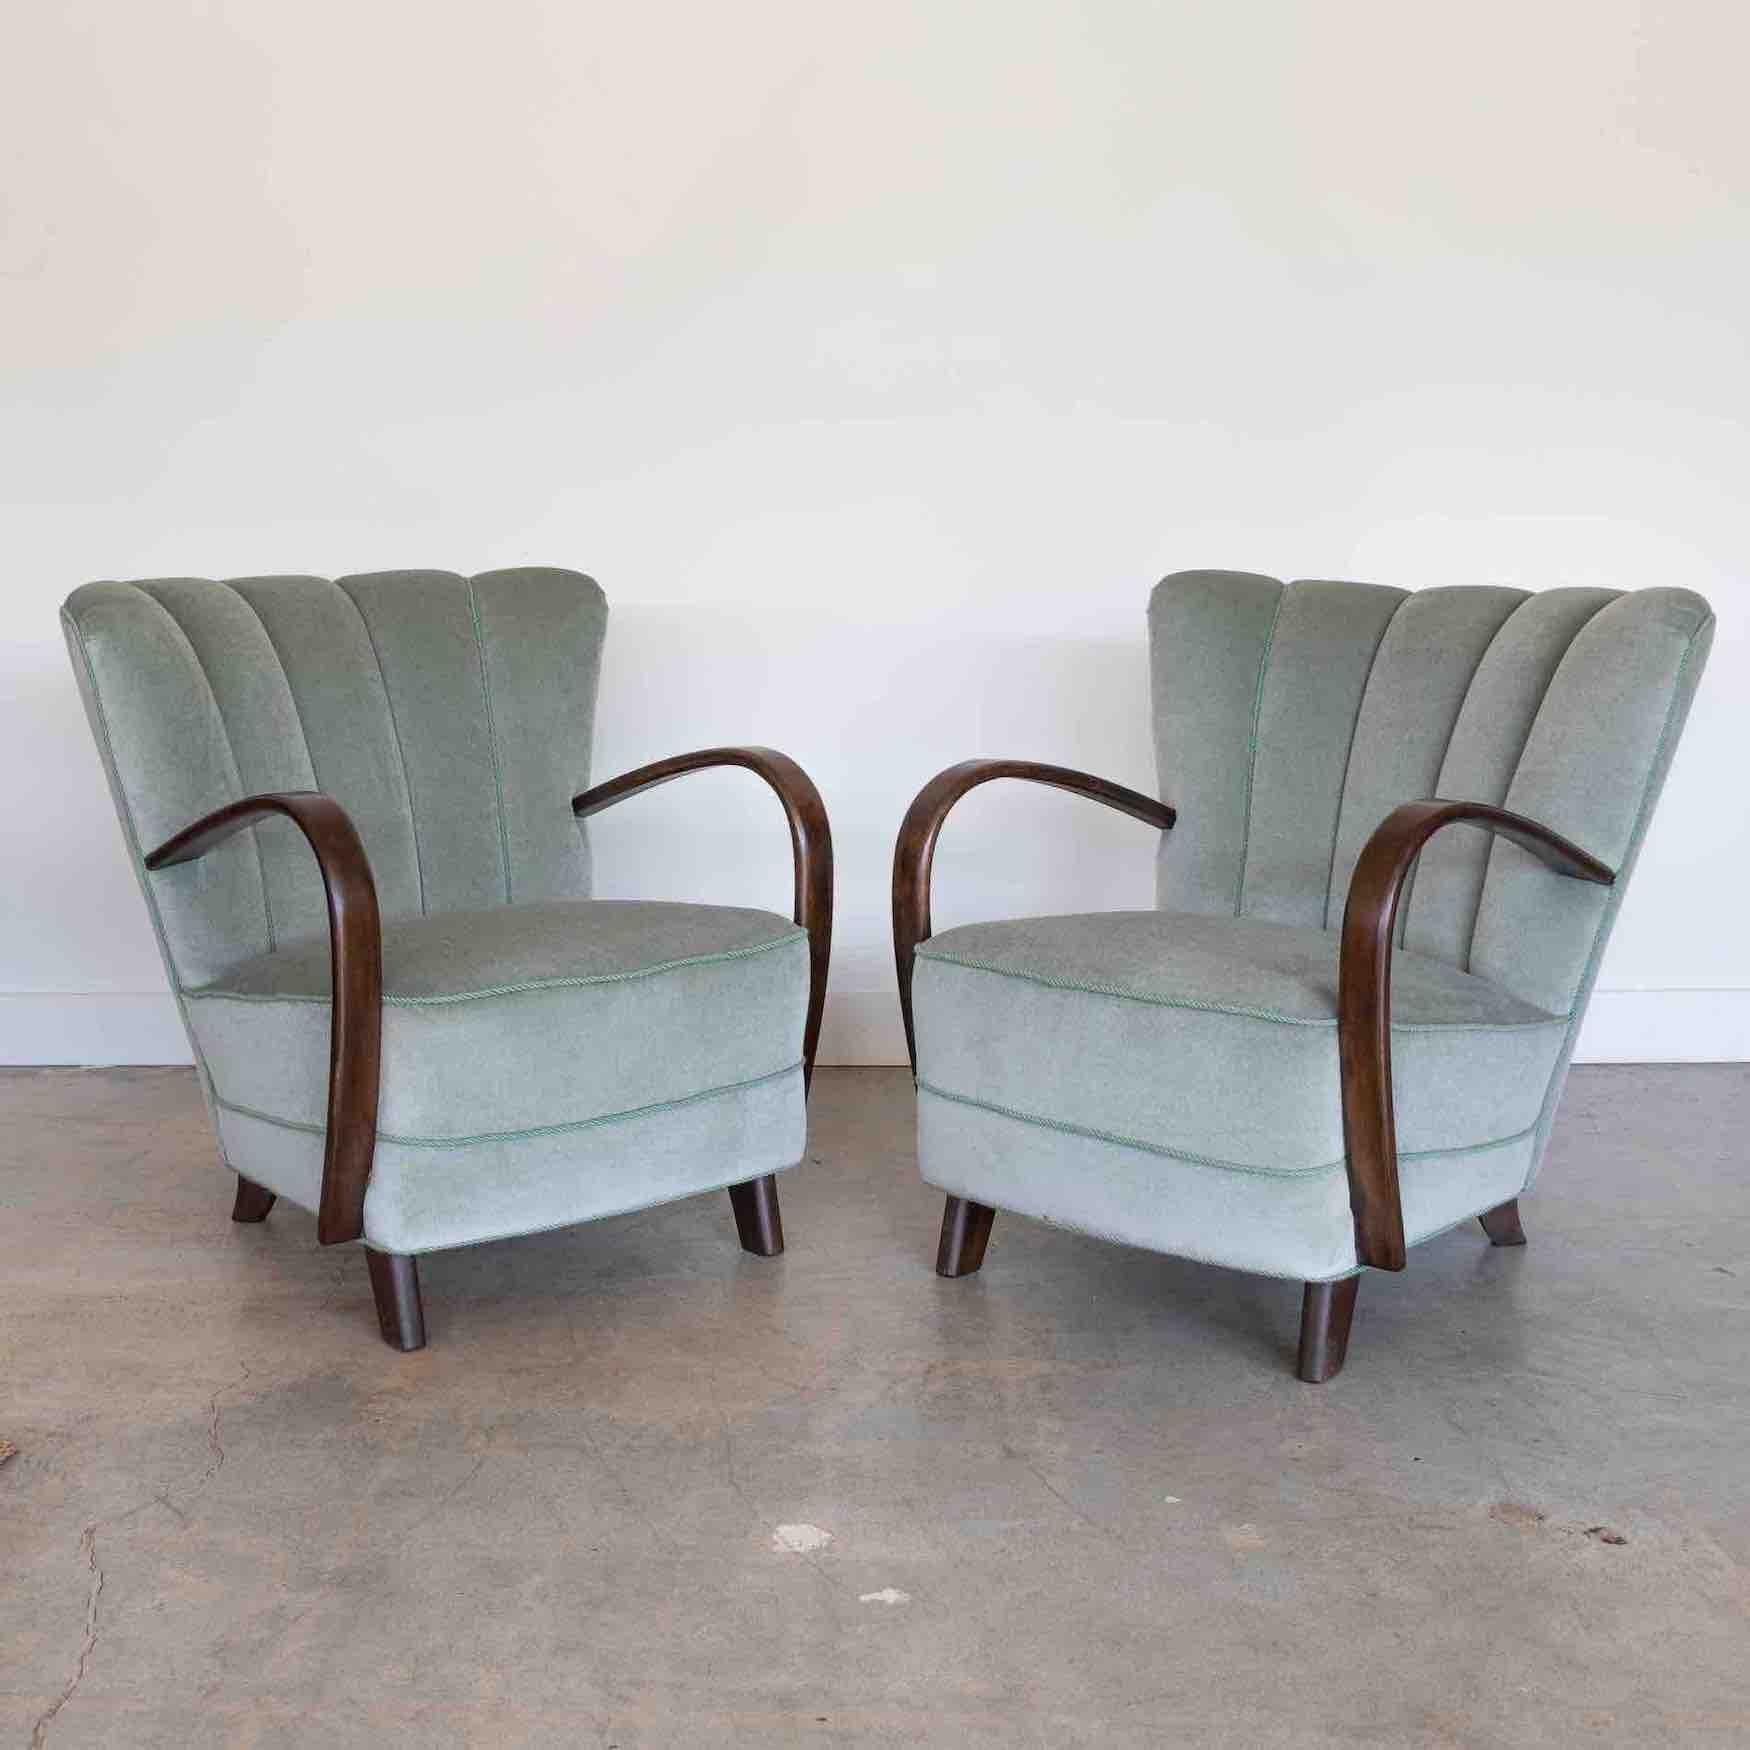 Stunning pair of upholstered Art Deco lounge chairs from Denmark, 1930's. Newly upholstered in soft seafoam green Italian mohair with complimentary piping detail. Beautifully curved wood arms and wood tapered feet in dark stain. Incredible pair of